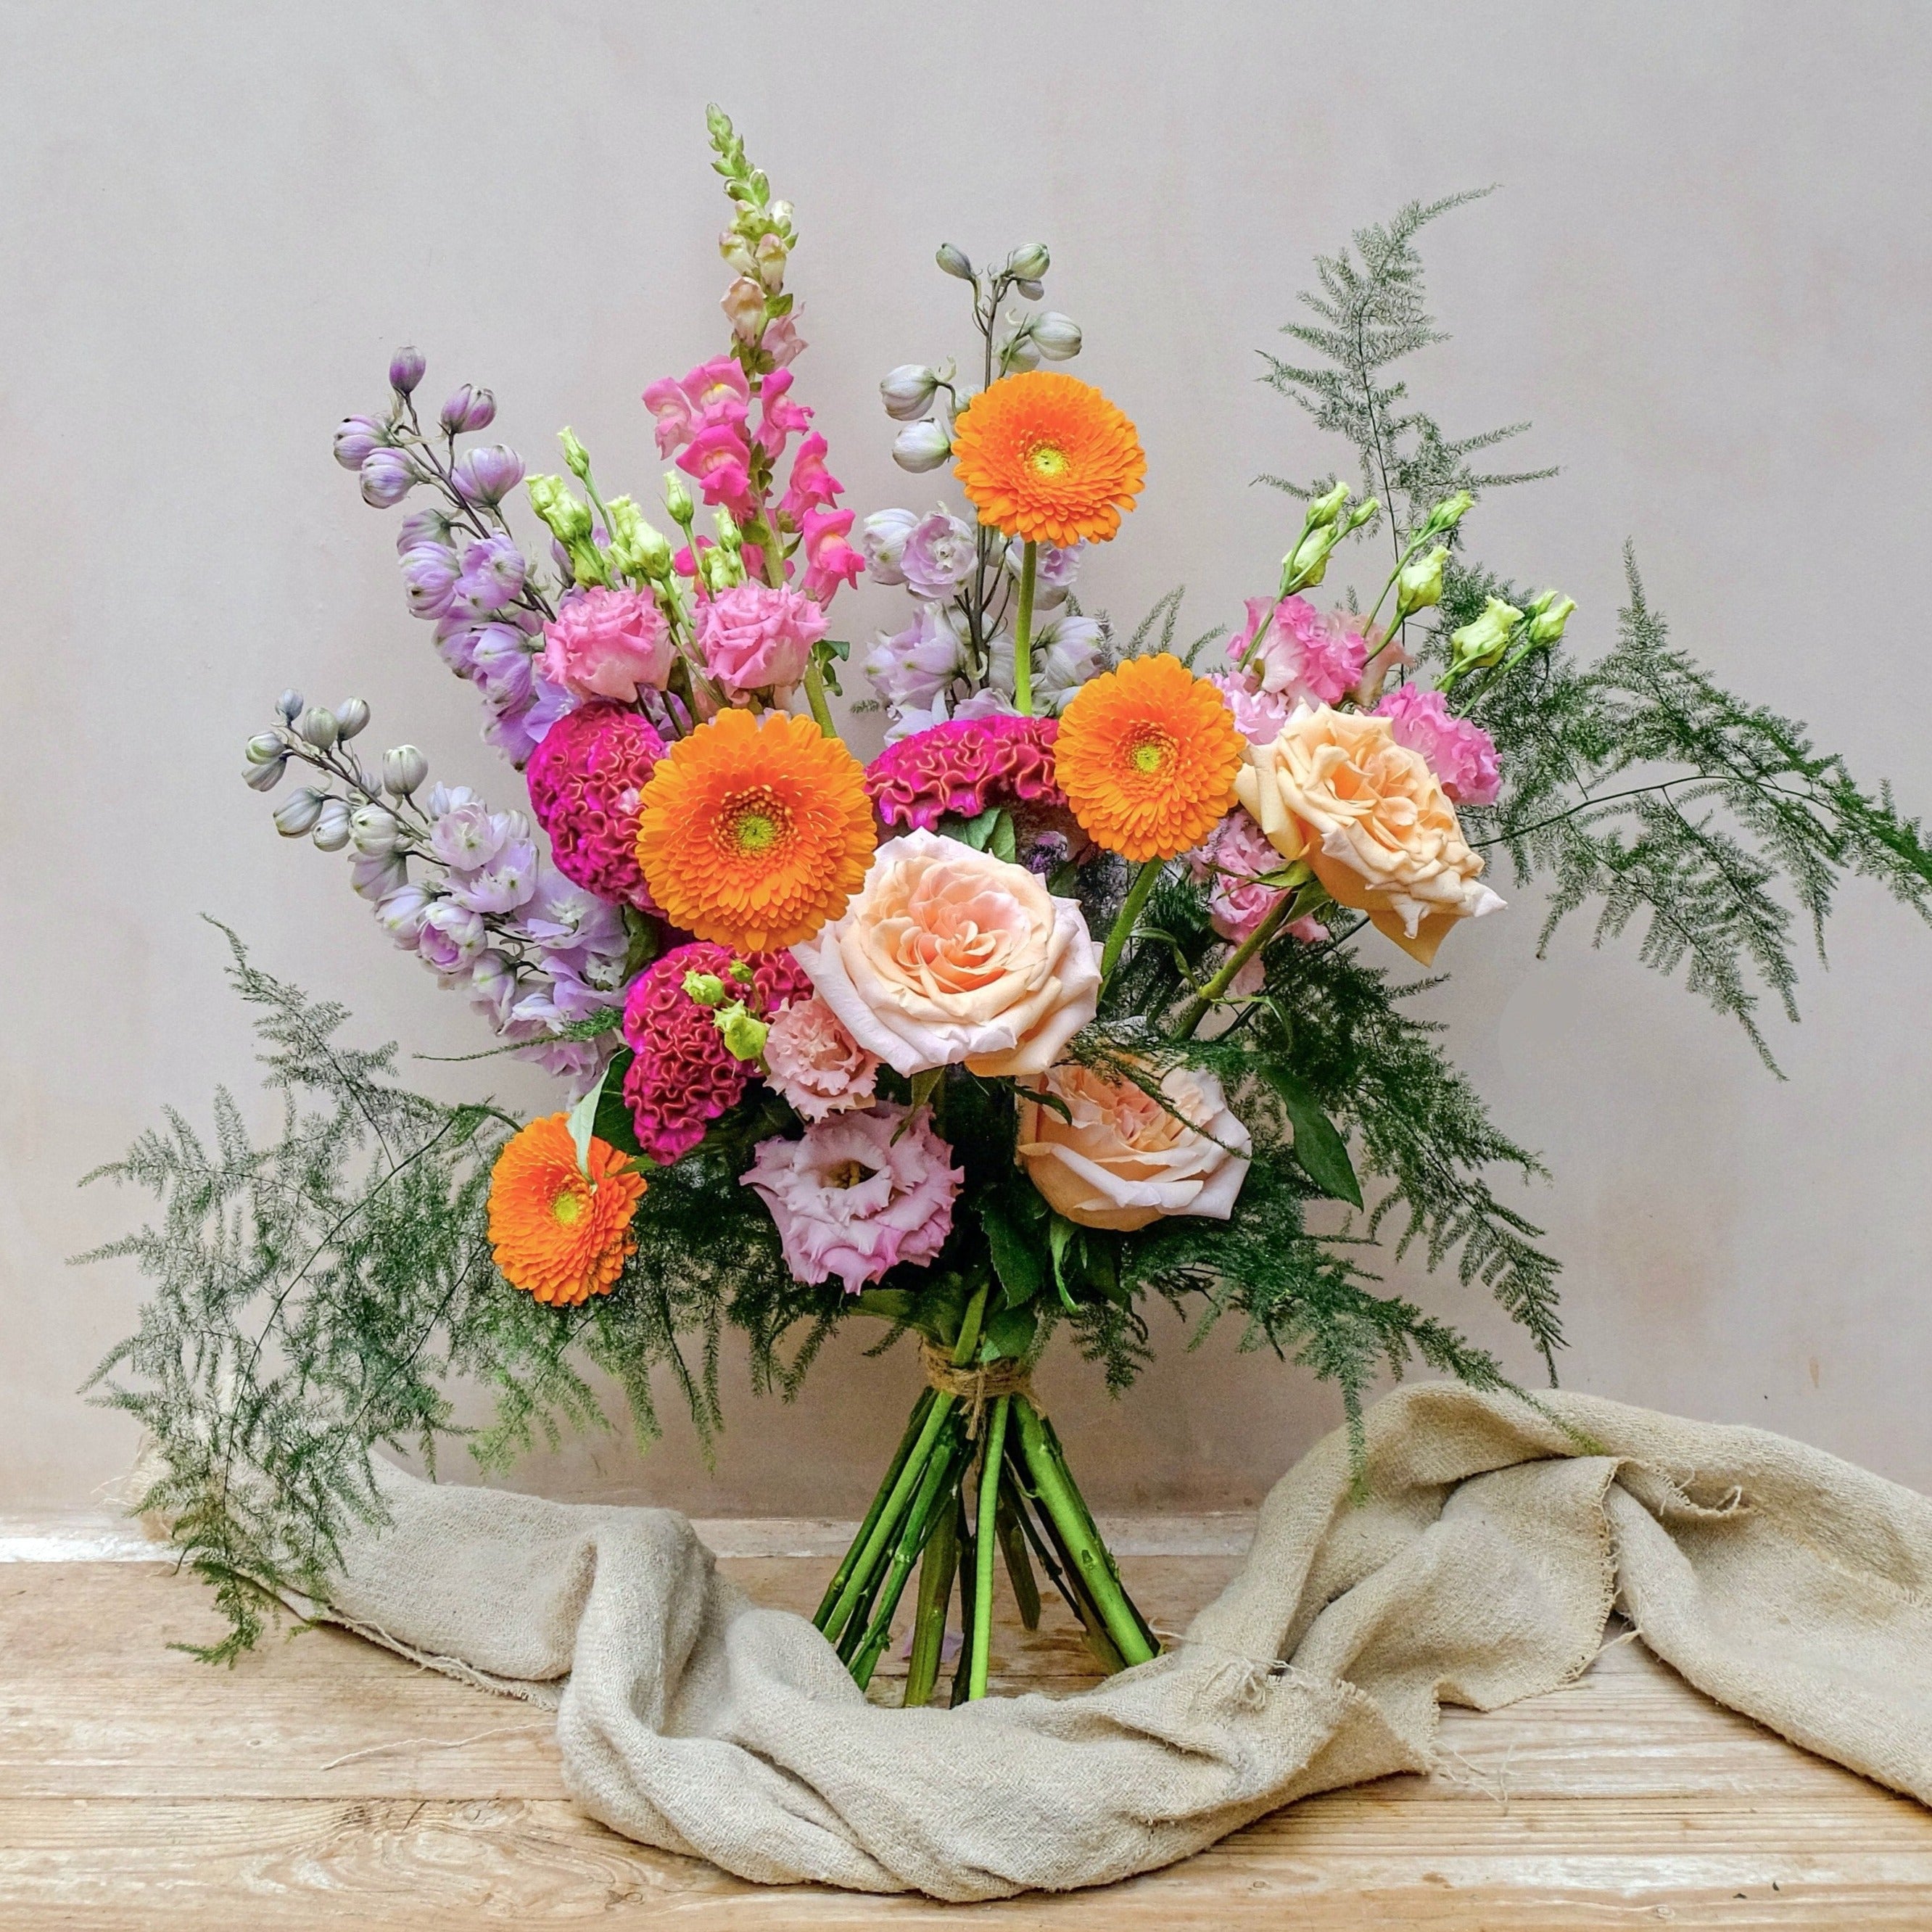 Colourful fresh flowers bouquet with purple delphinium, orange gerbera and ppink snadragon